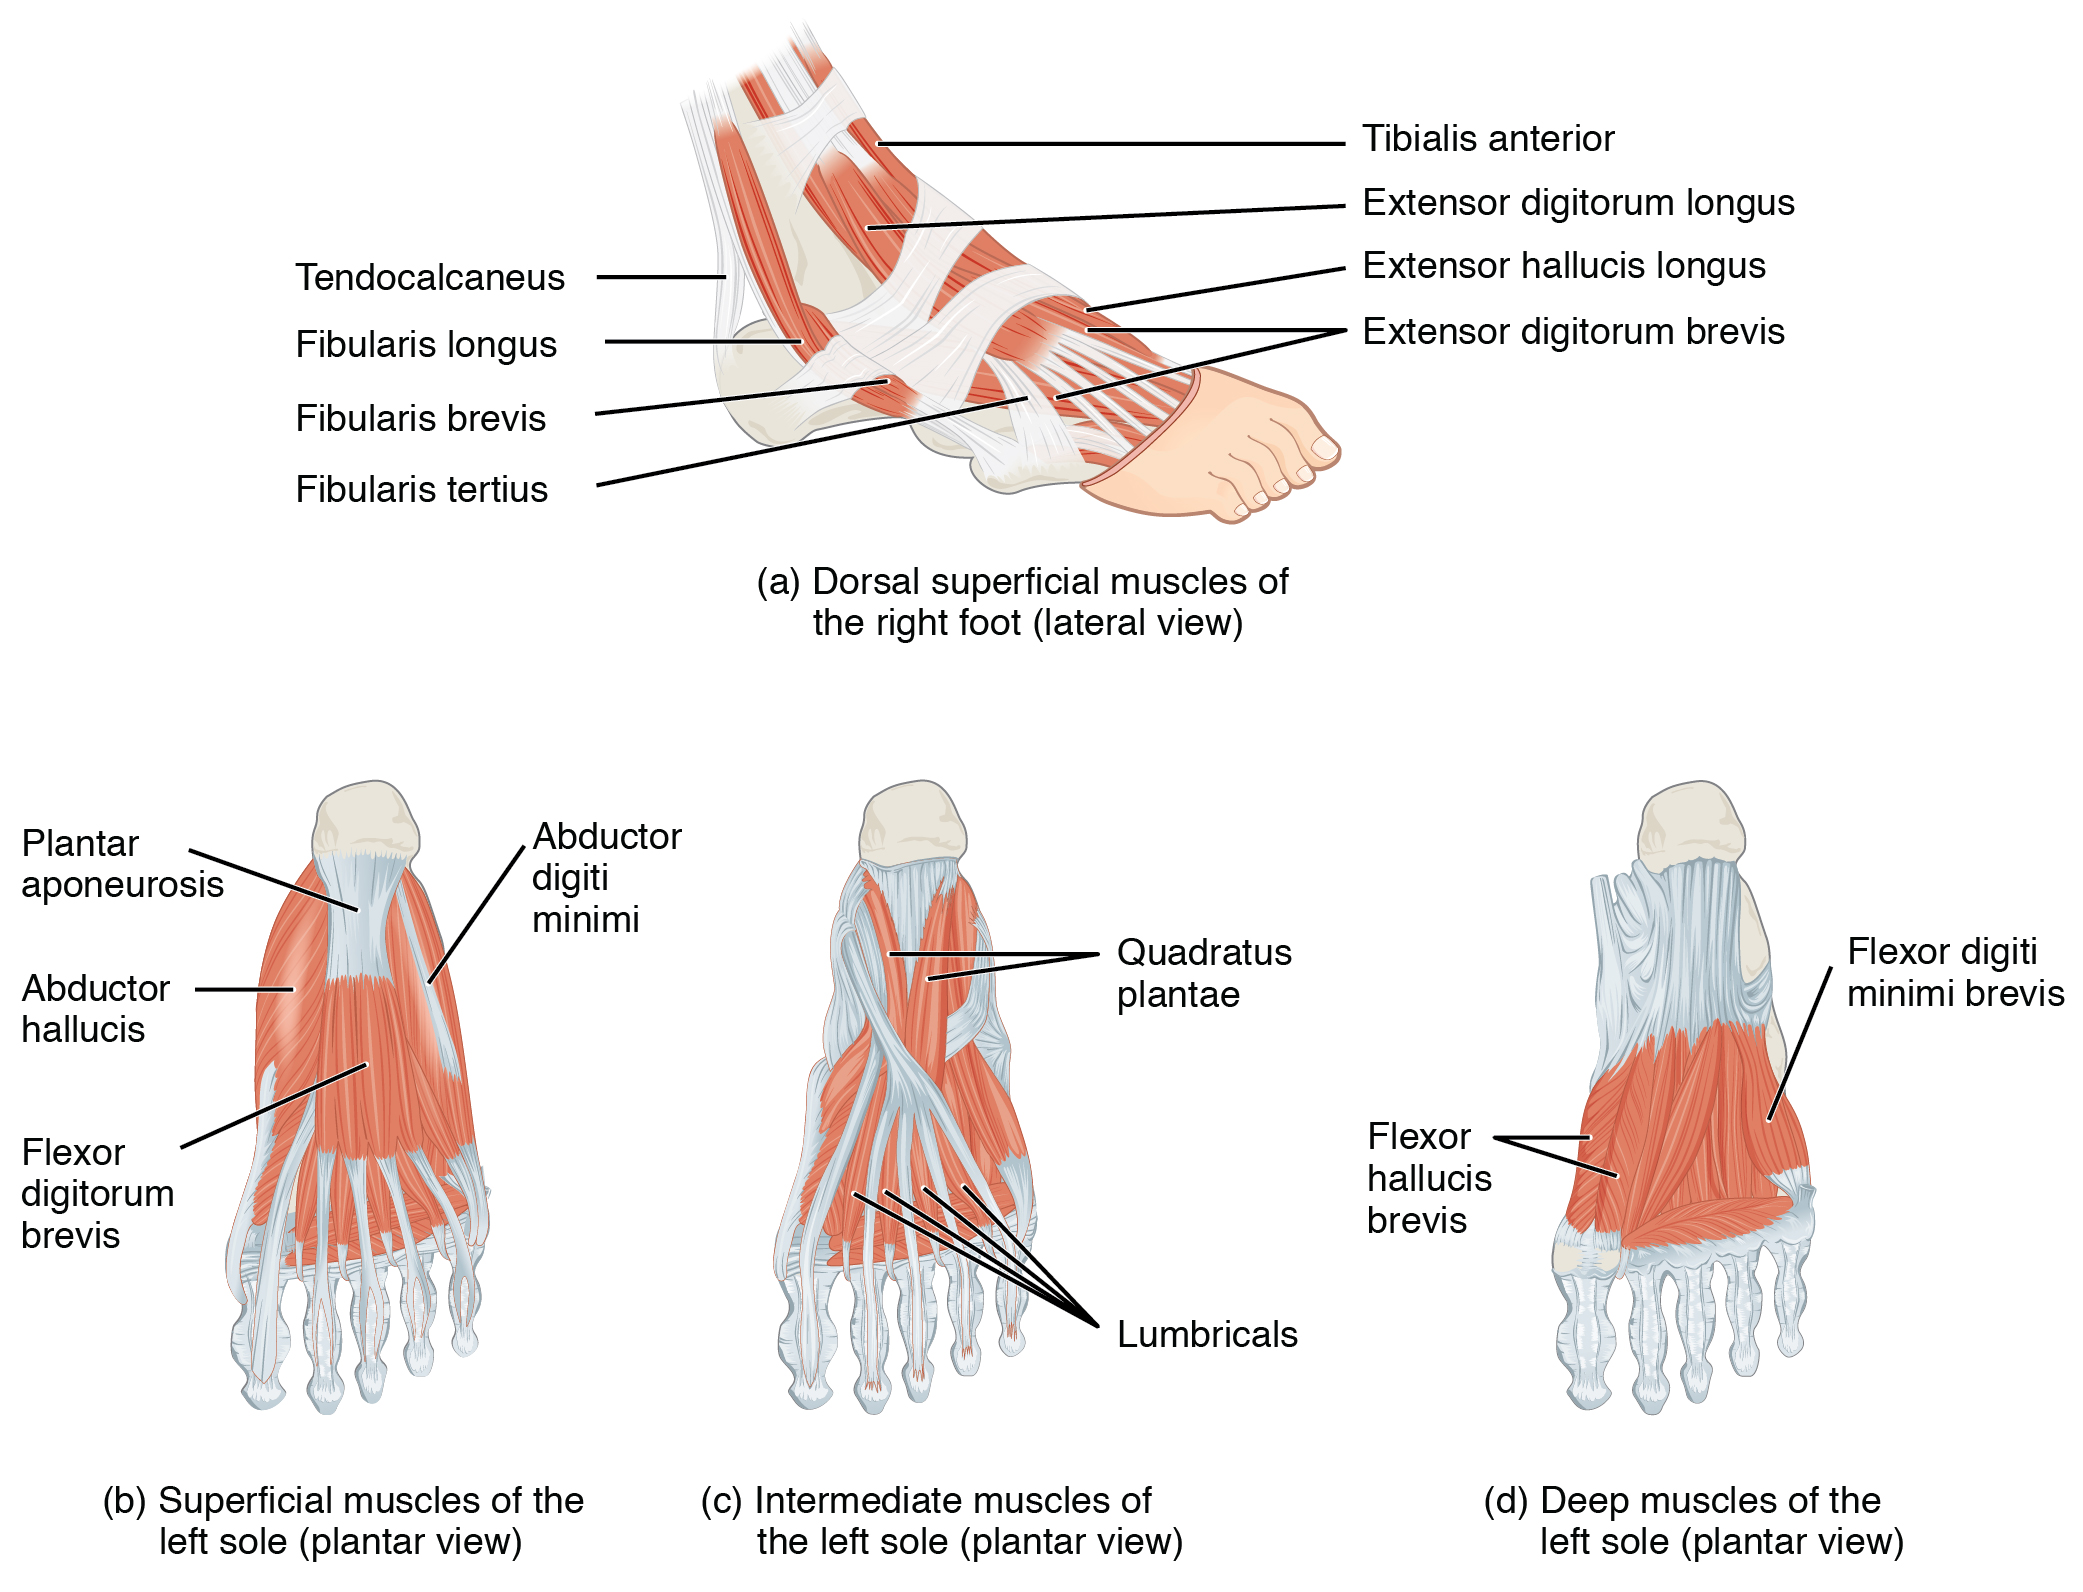 This figure shows the muscles of the foot. The top panel shows the